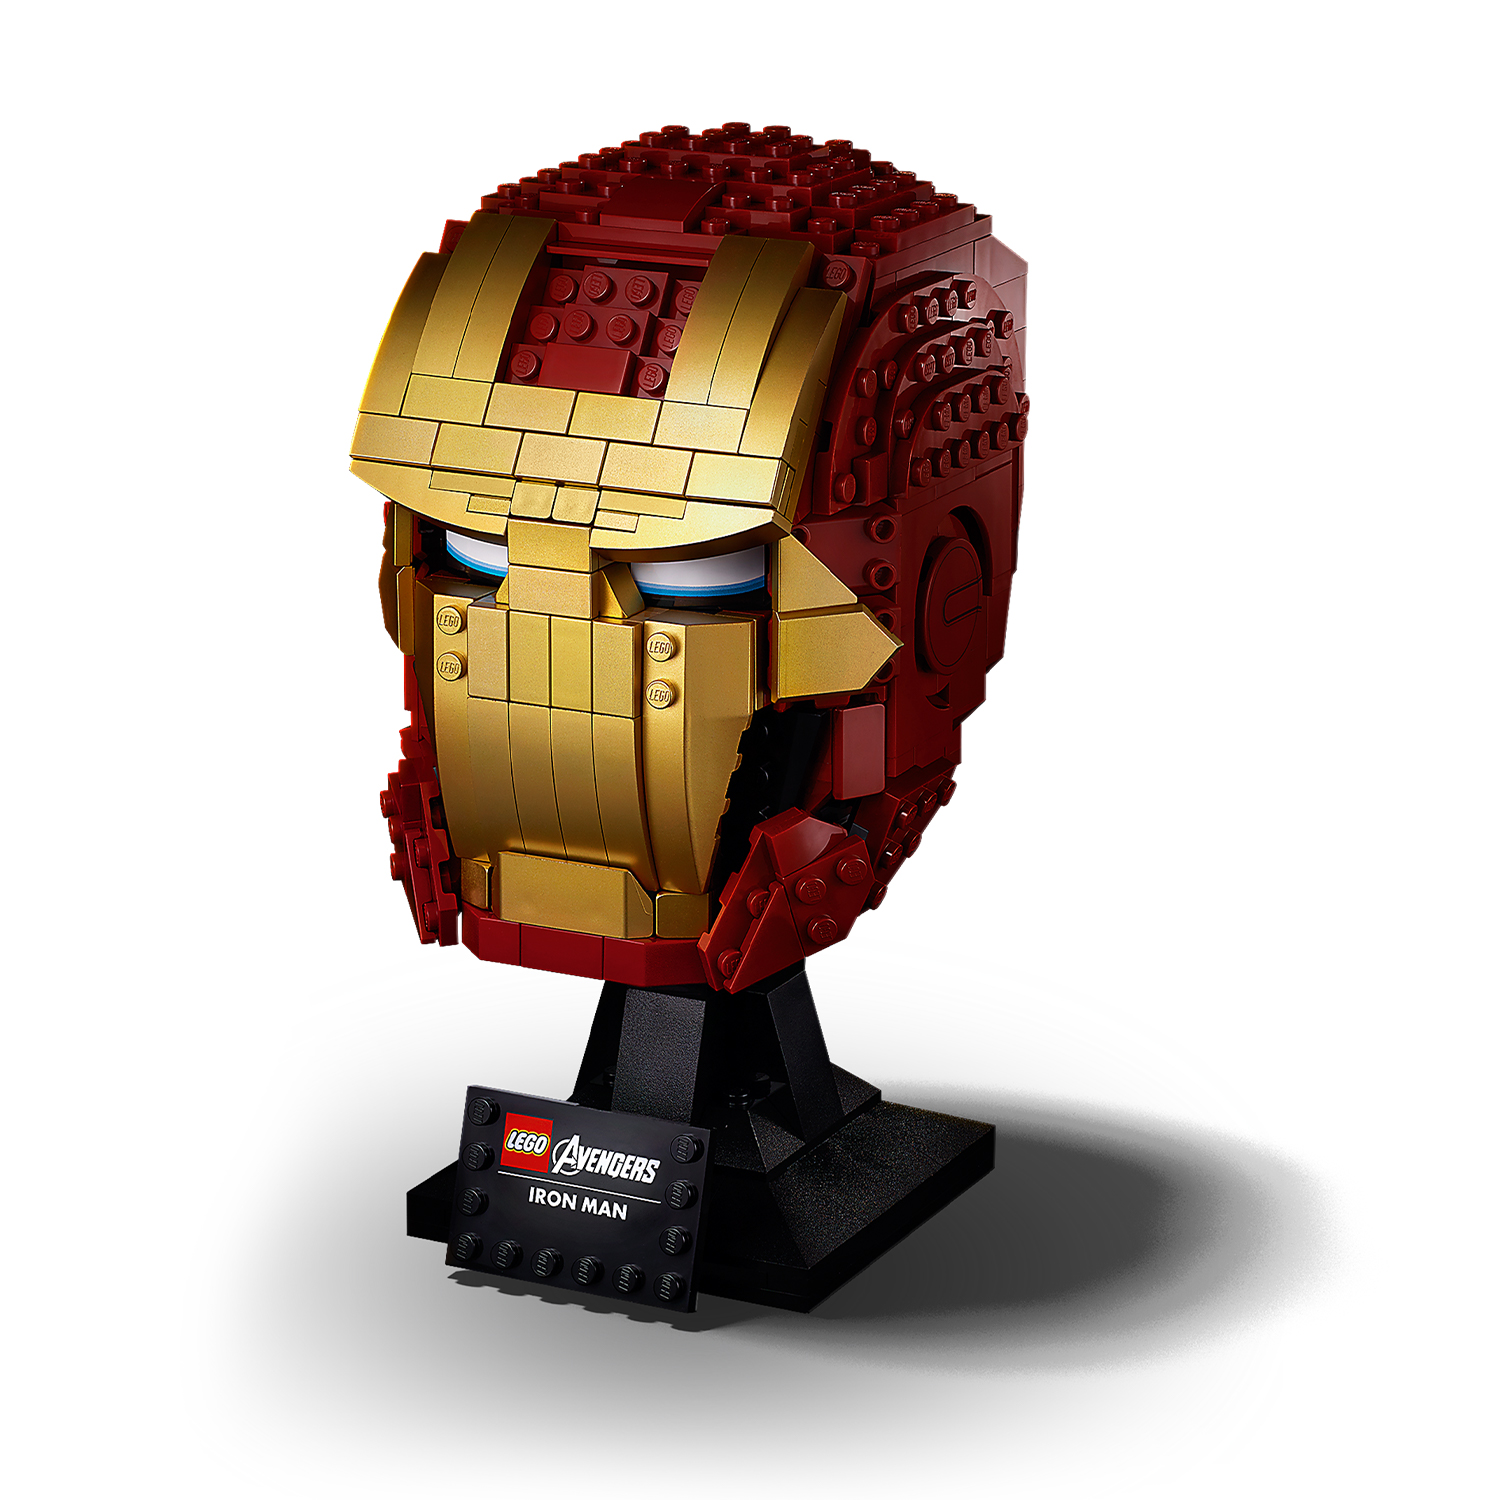 LEGO Marvel Avengers Iron Man Helmet 76165; Brick Iron Man-Mask for-Adults to Build and Display, Creative Challenge for Marvel Fans (480 Pieces) - image 1 of 8